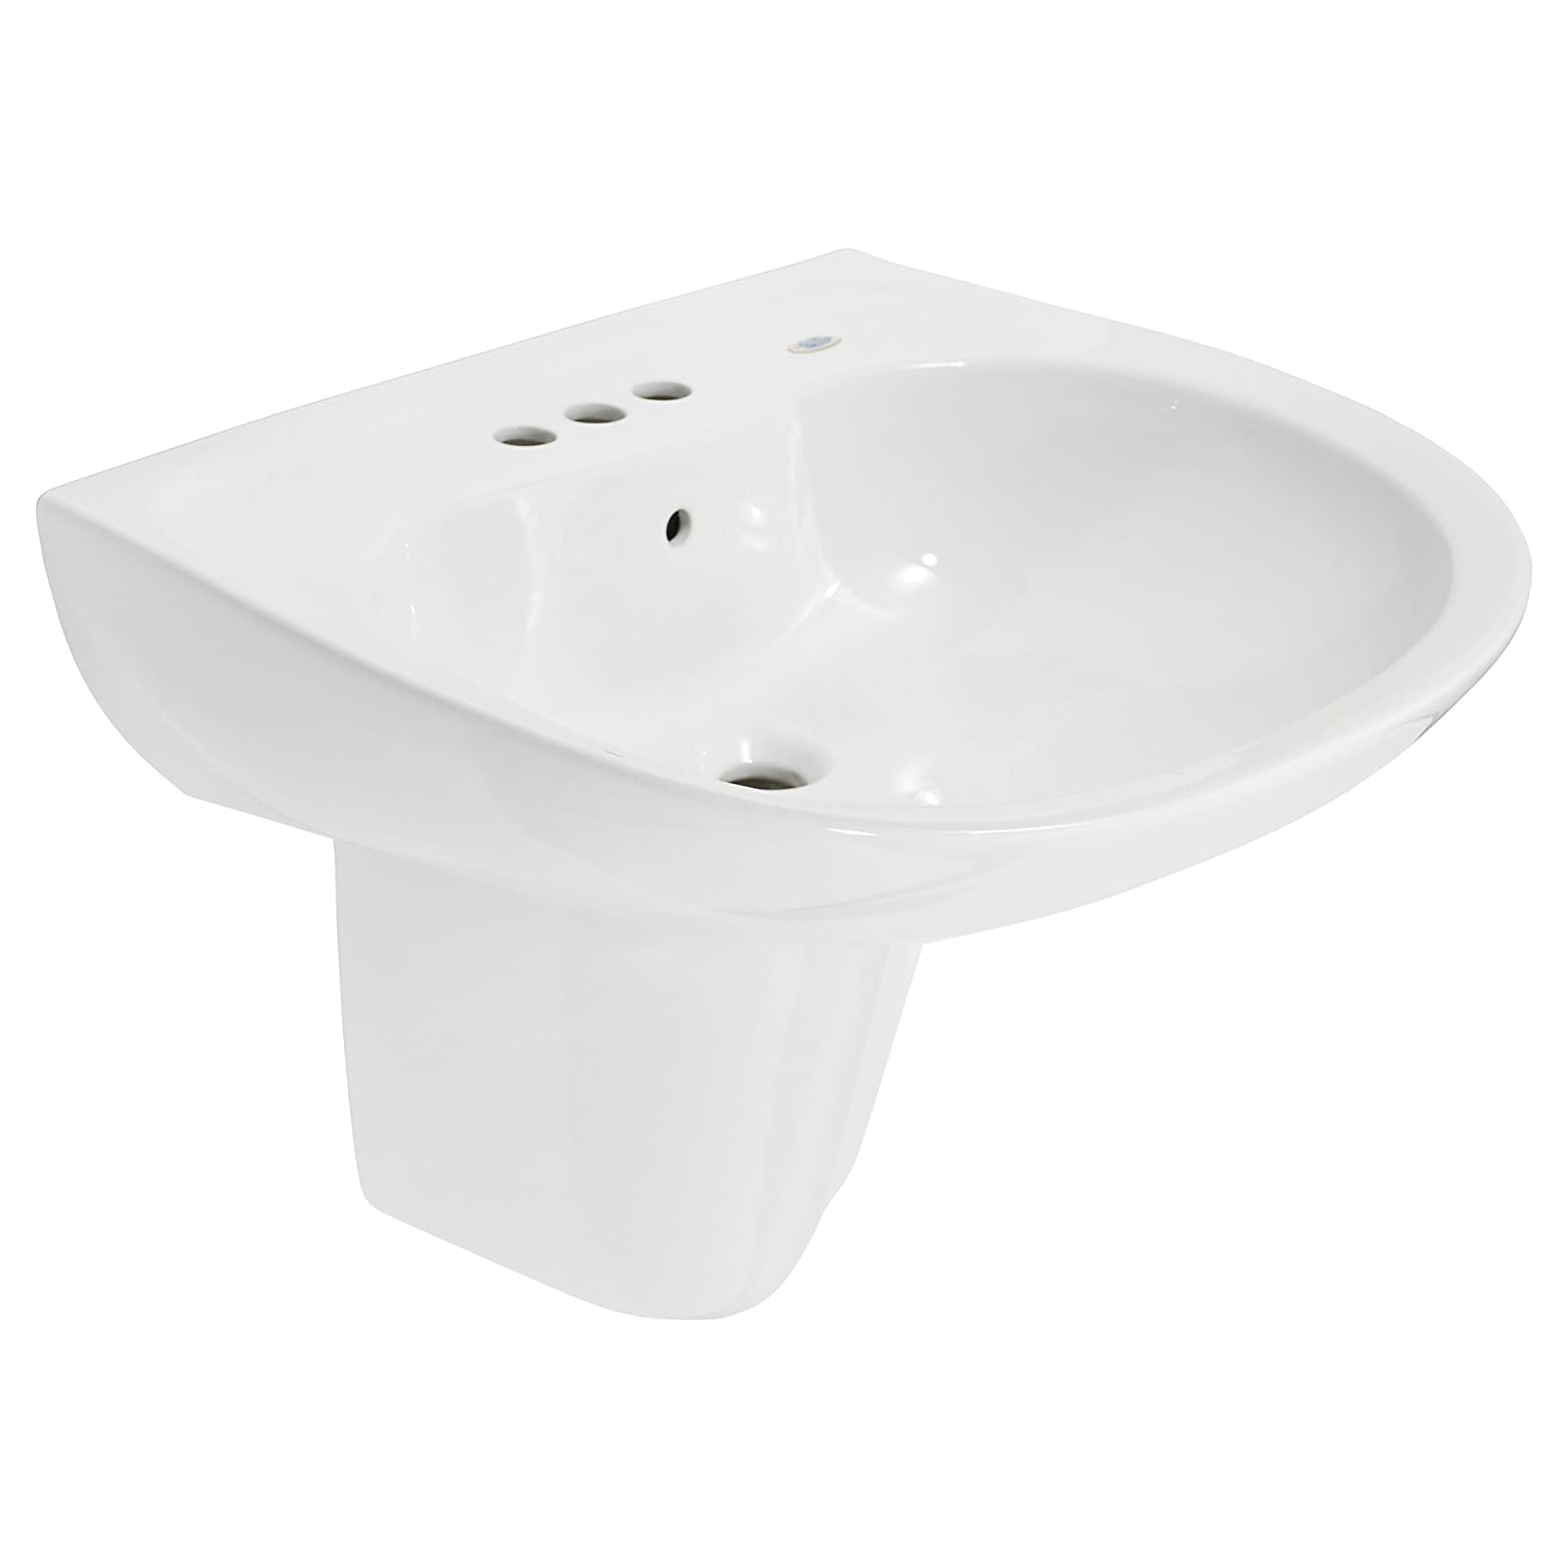 Prominence 26x21"Wall Mount Lav Sink in Cotton White w/4" Fct Holes